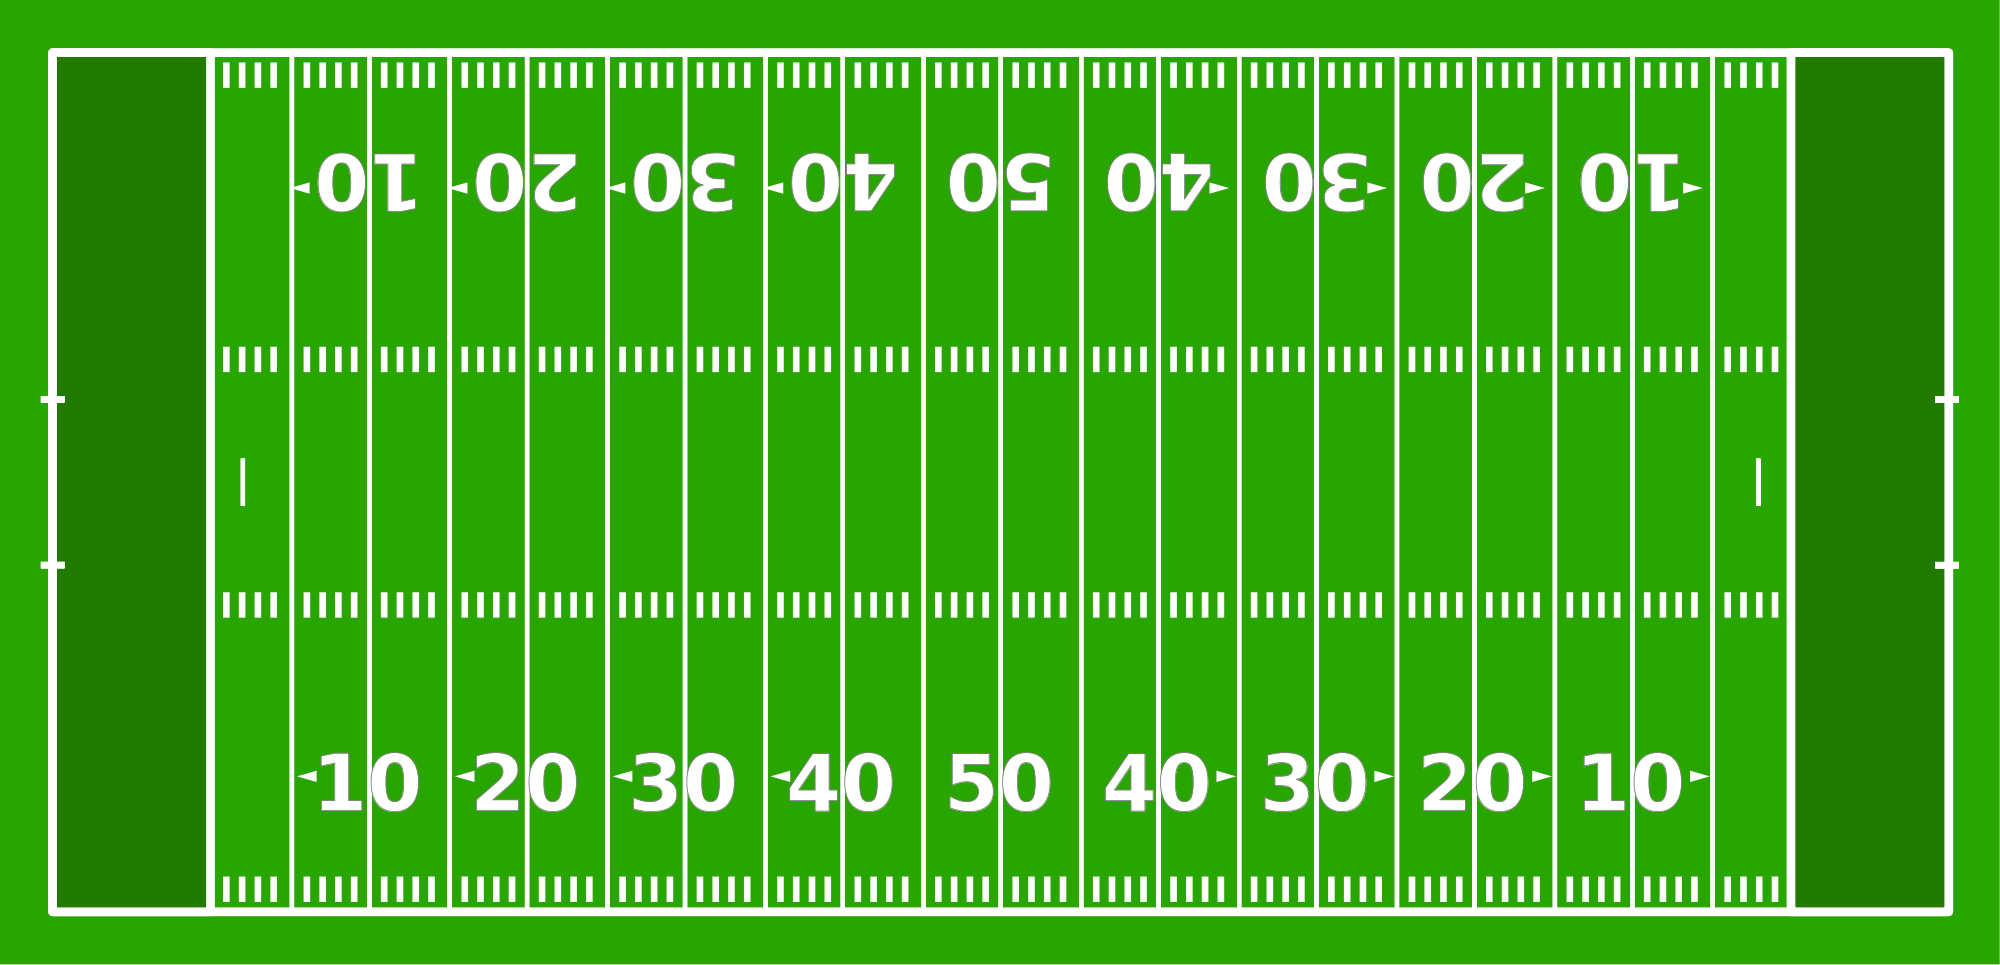 Diagram Of An American Football Field Numbers On The 